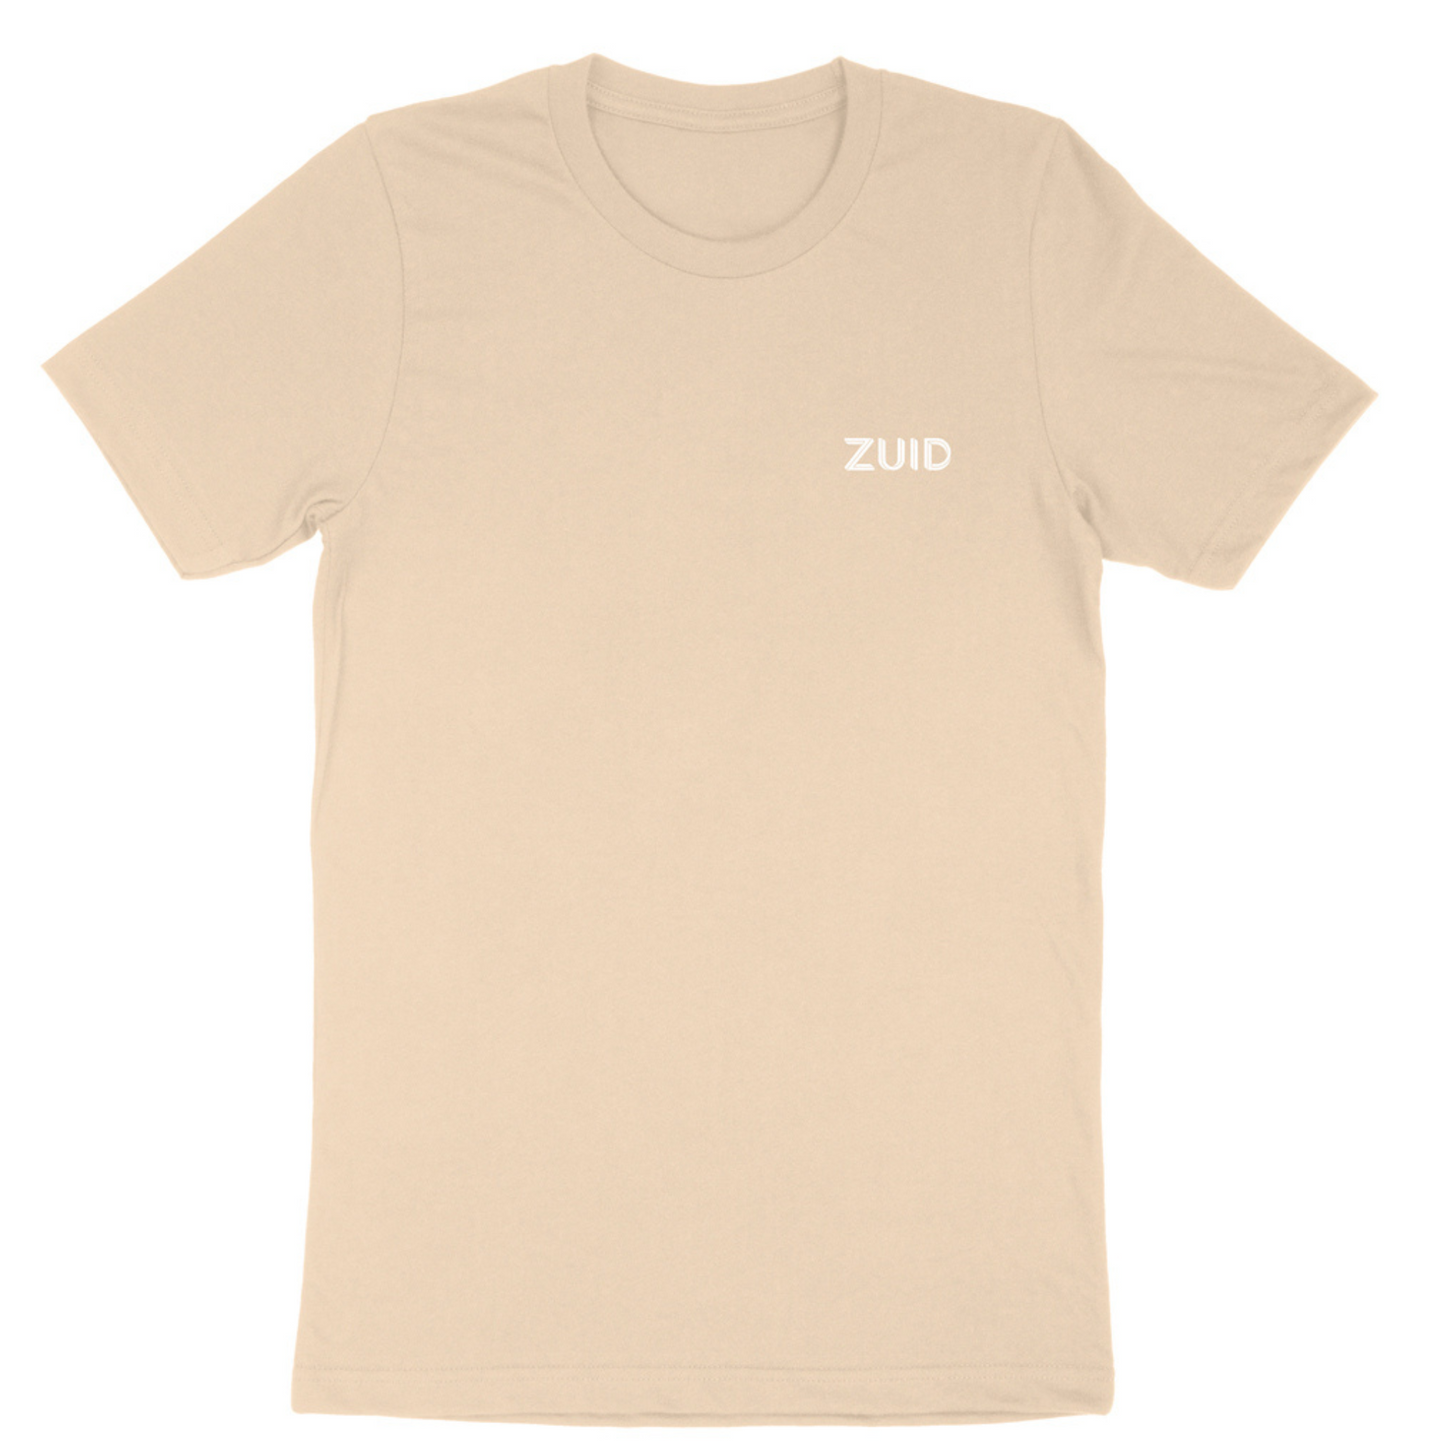 Zuid Limited edition Sand T-shirt